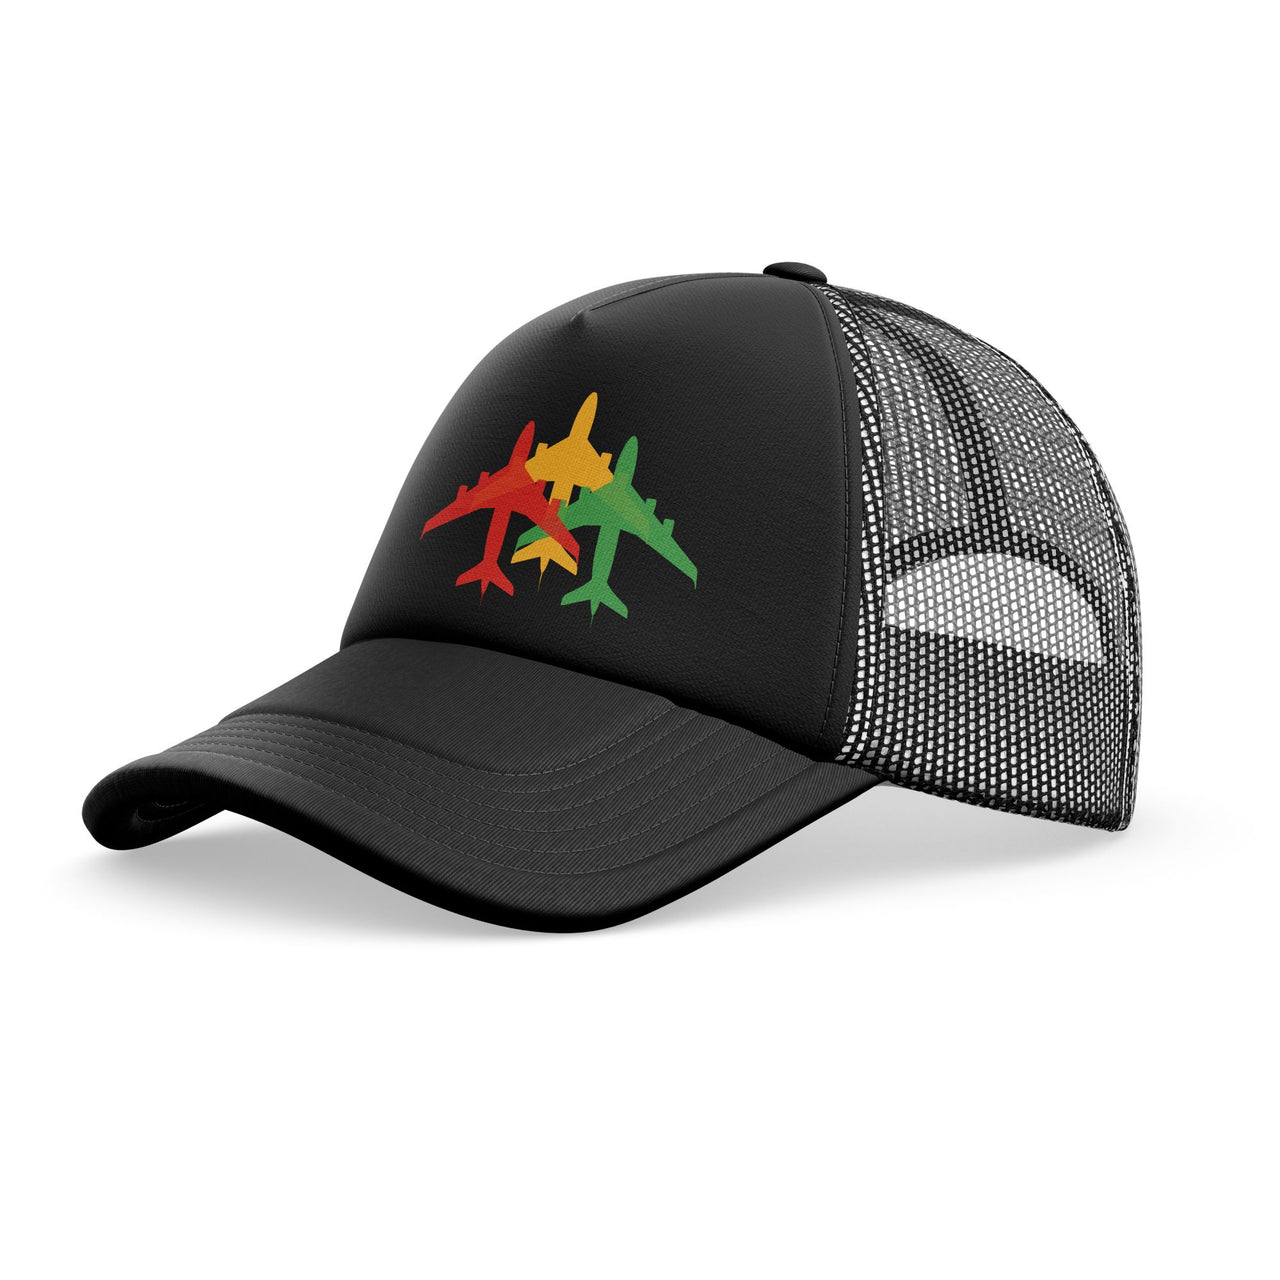 Colourful 3 Airplanes Designed Trucker Caps & Hats